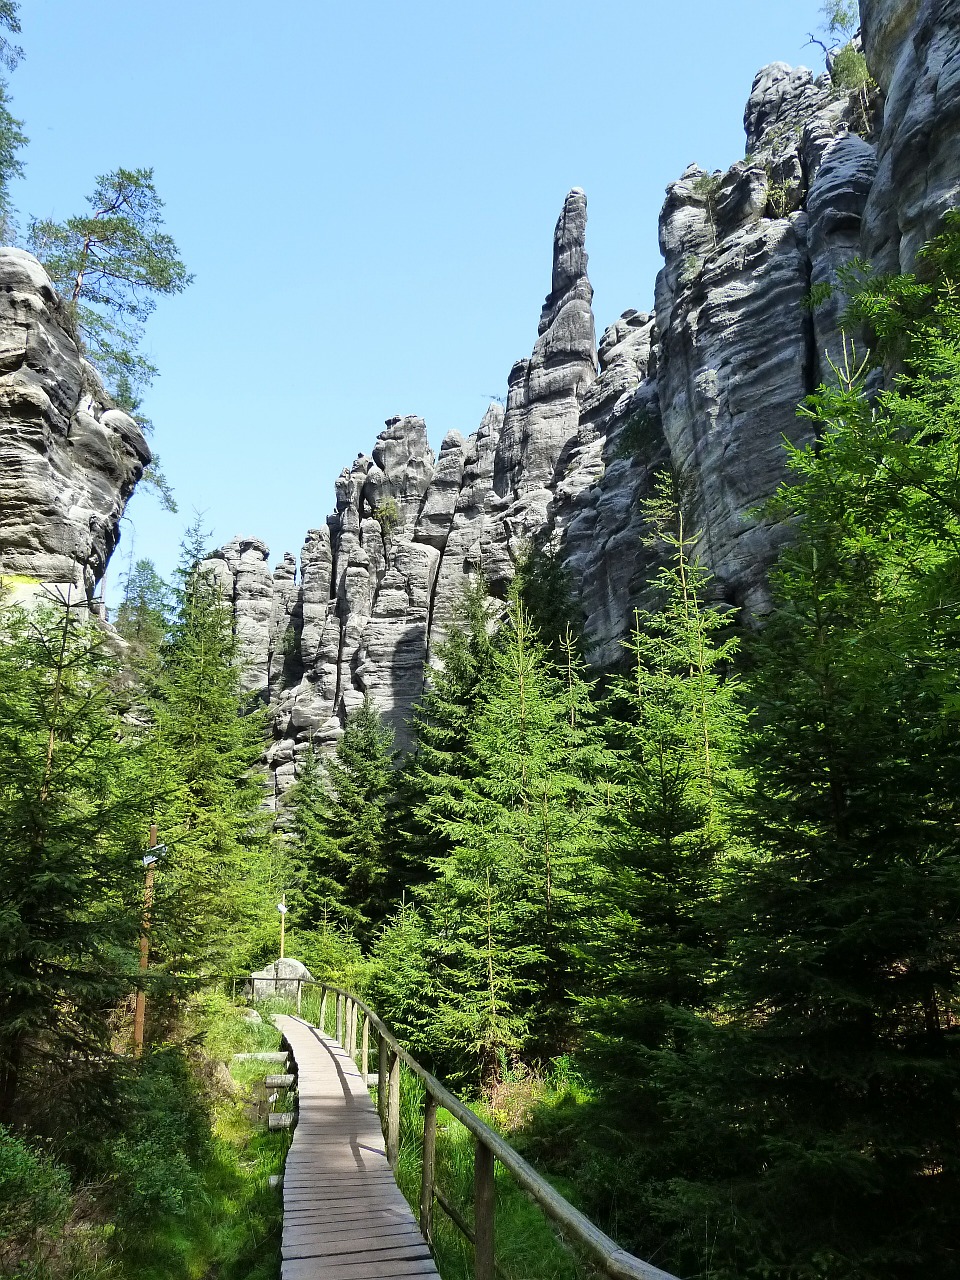 teplice rocks nature forest free photo